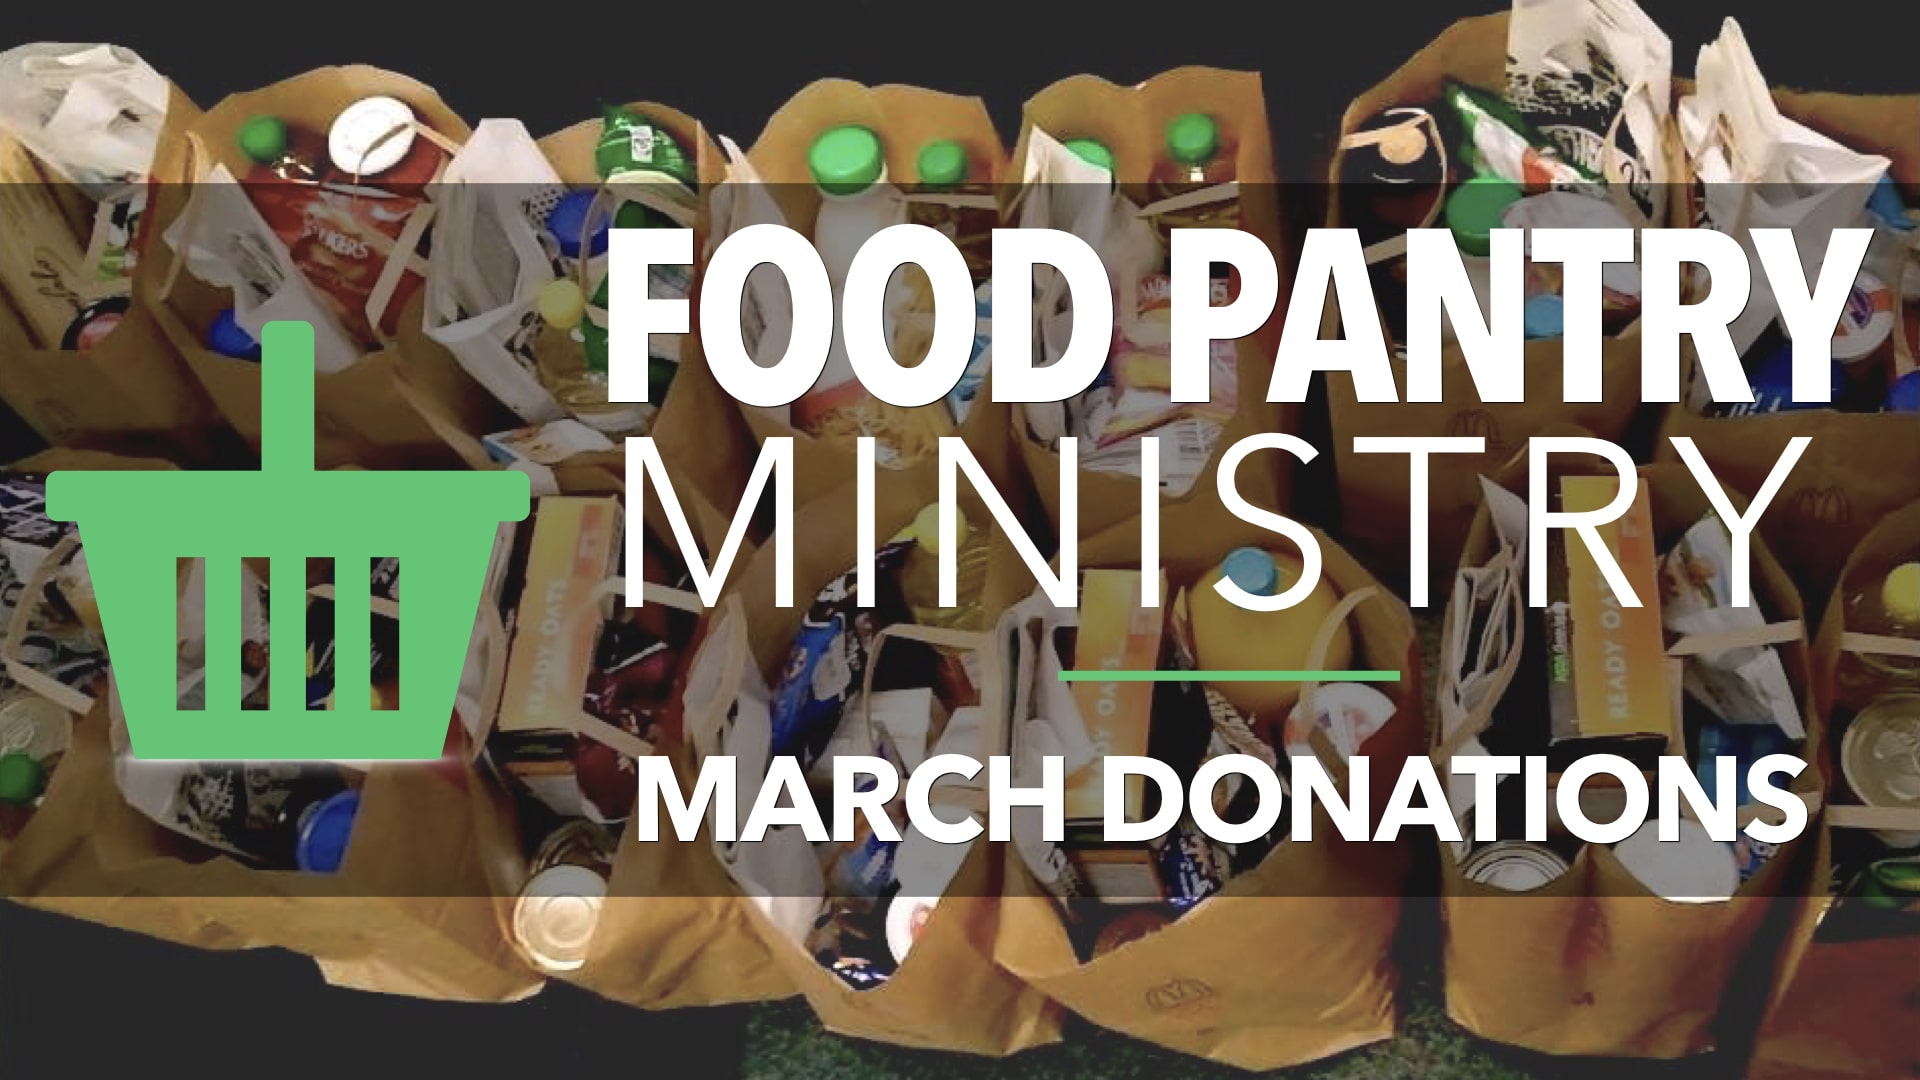 RLC Food Pantry Ministry: March Donations